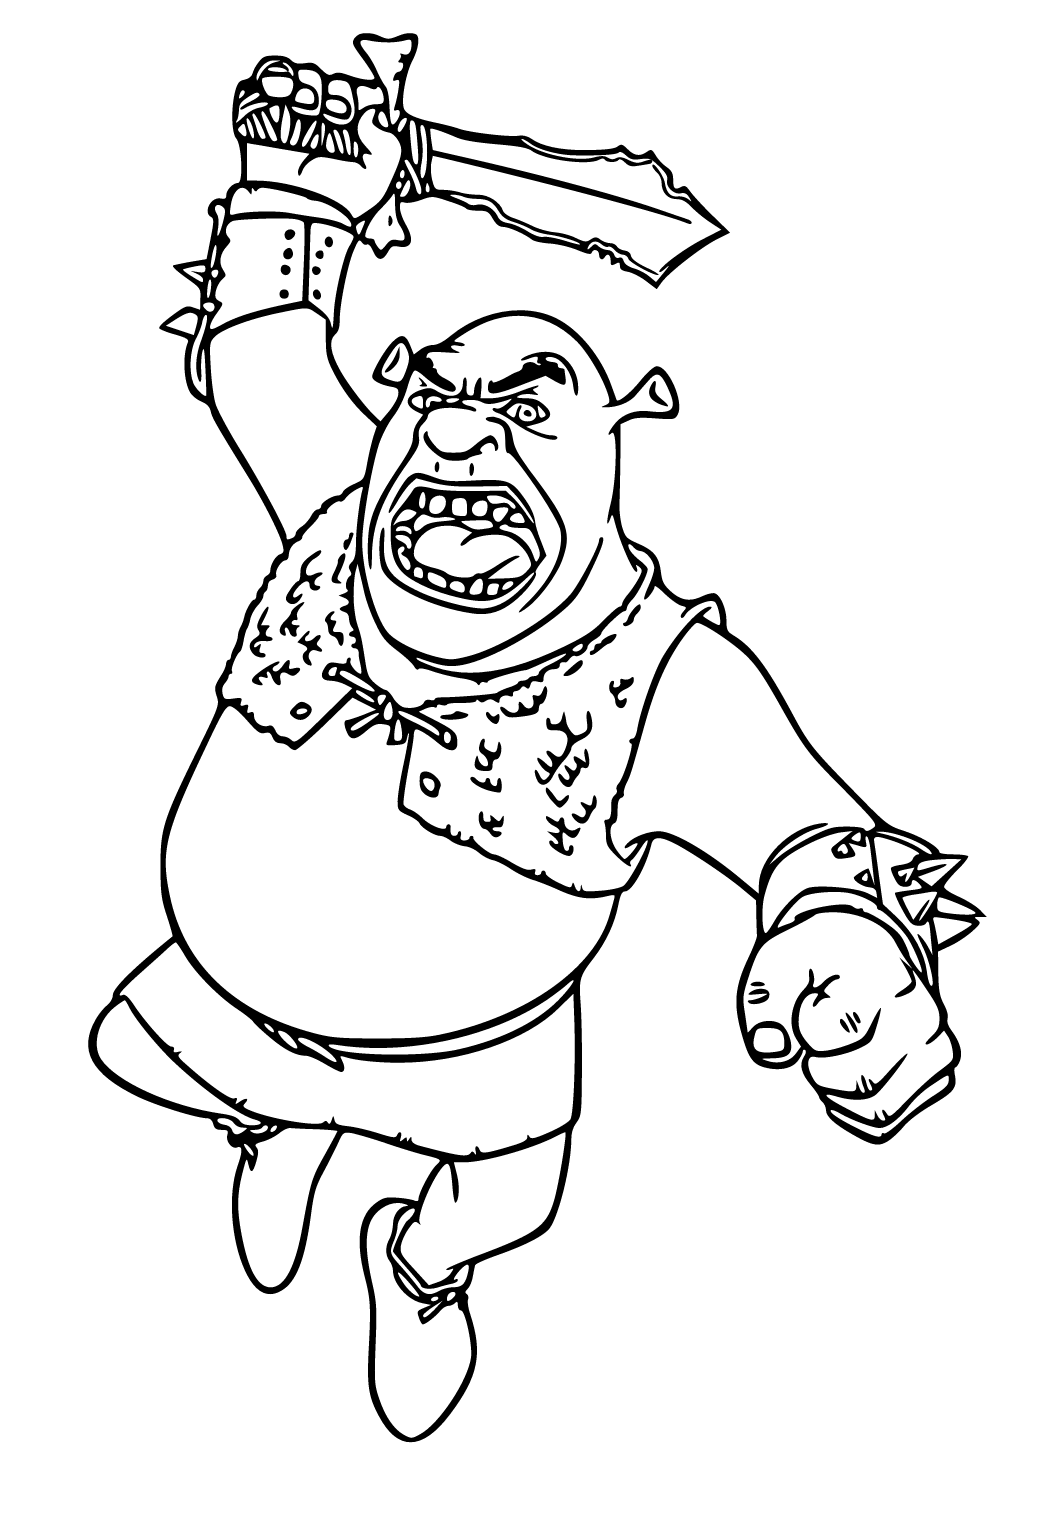 Free printable shrek sword coloring page for adults and kids